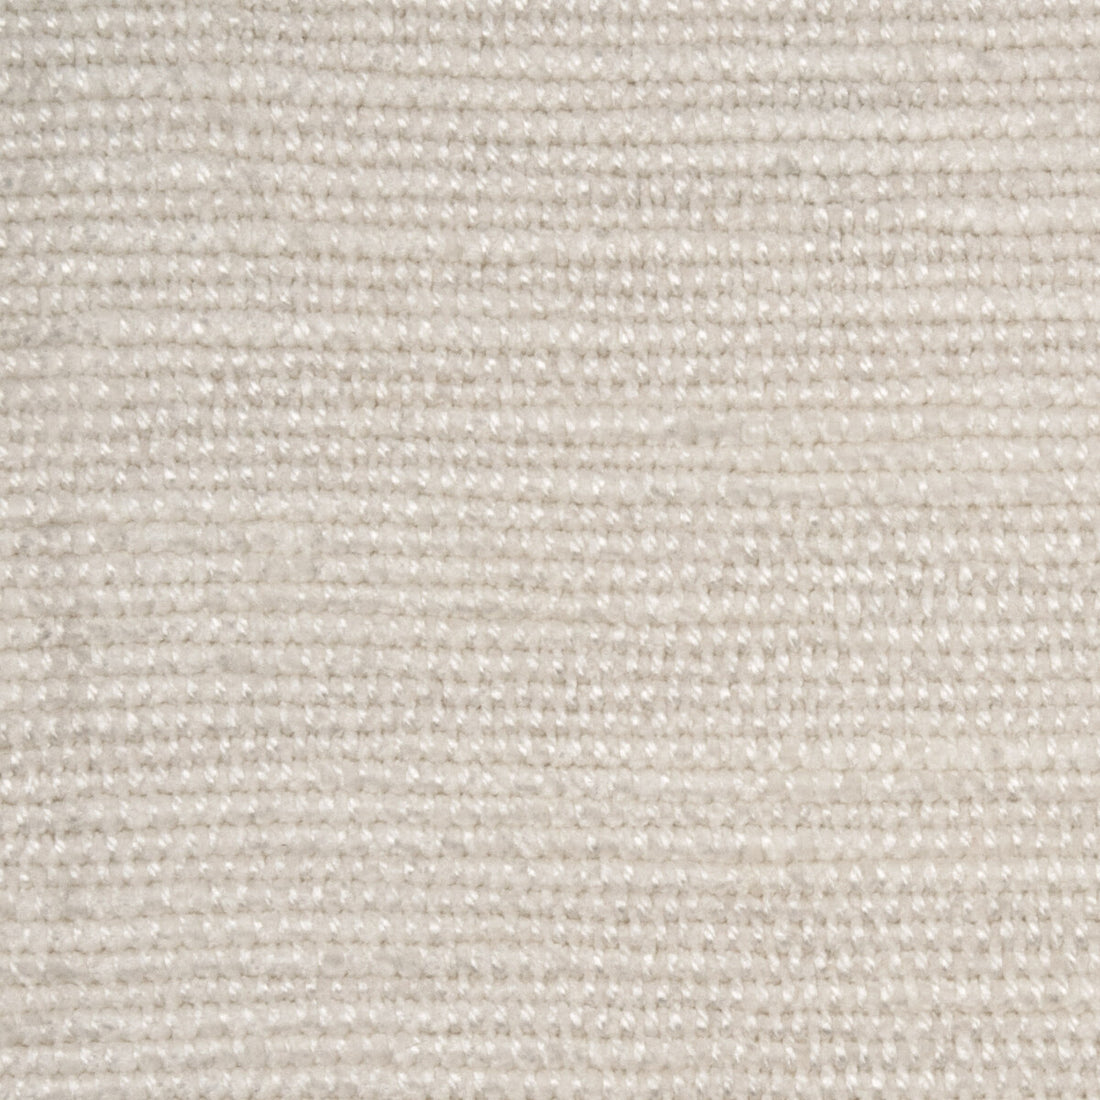 Boundless fabric in talc color - pattern 34609.100.0 - by Kravet Couture in the Calvin Klein Home collection